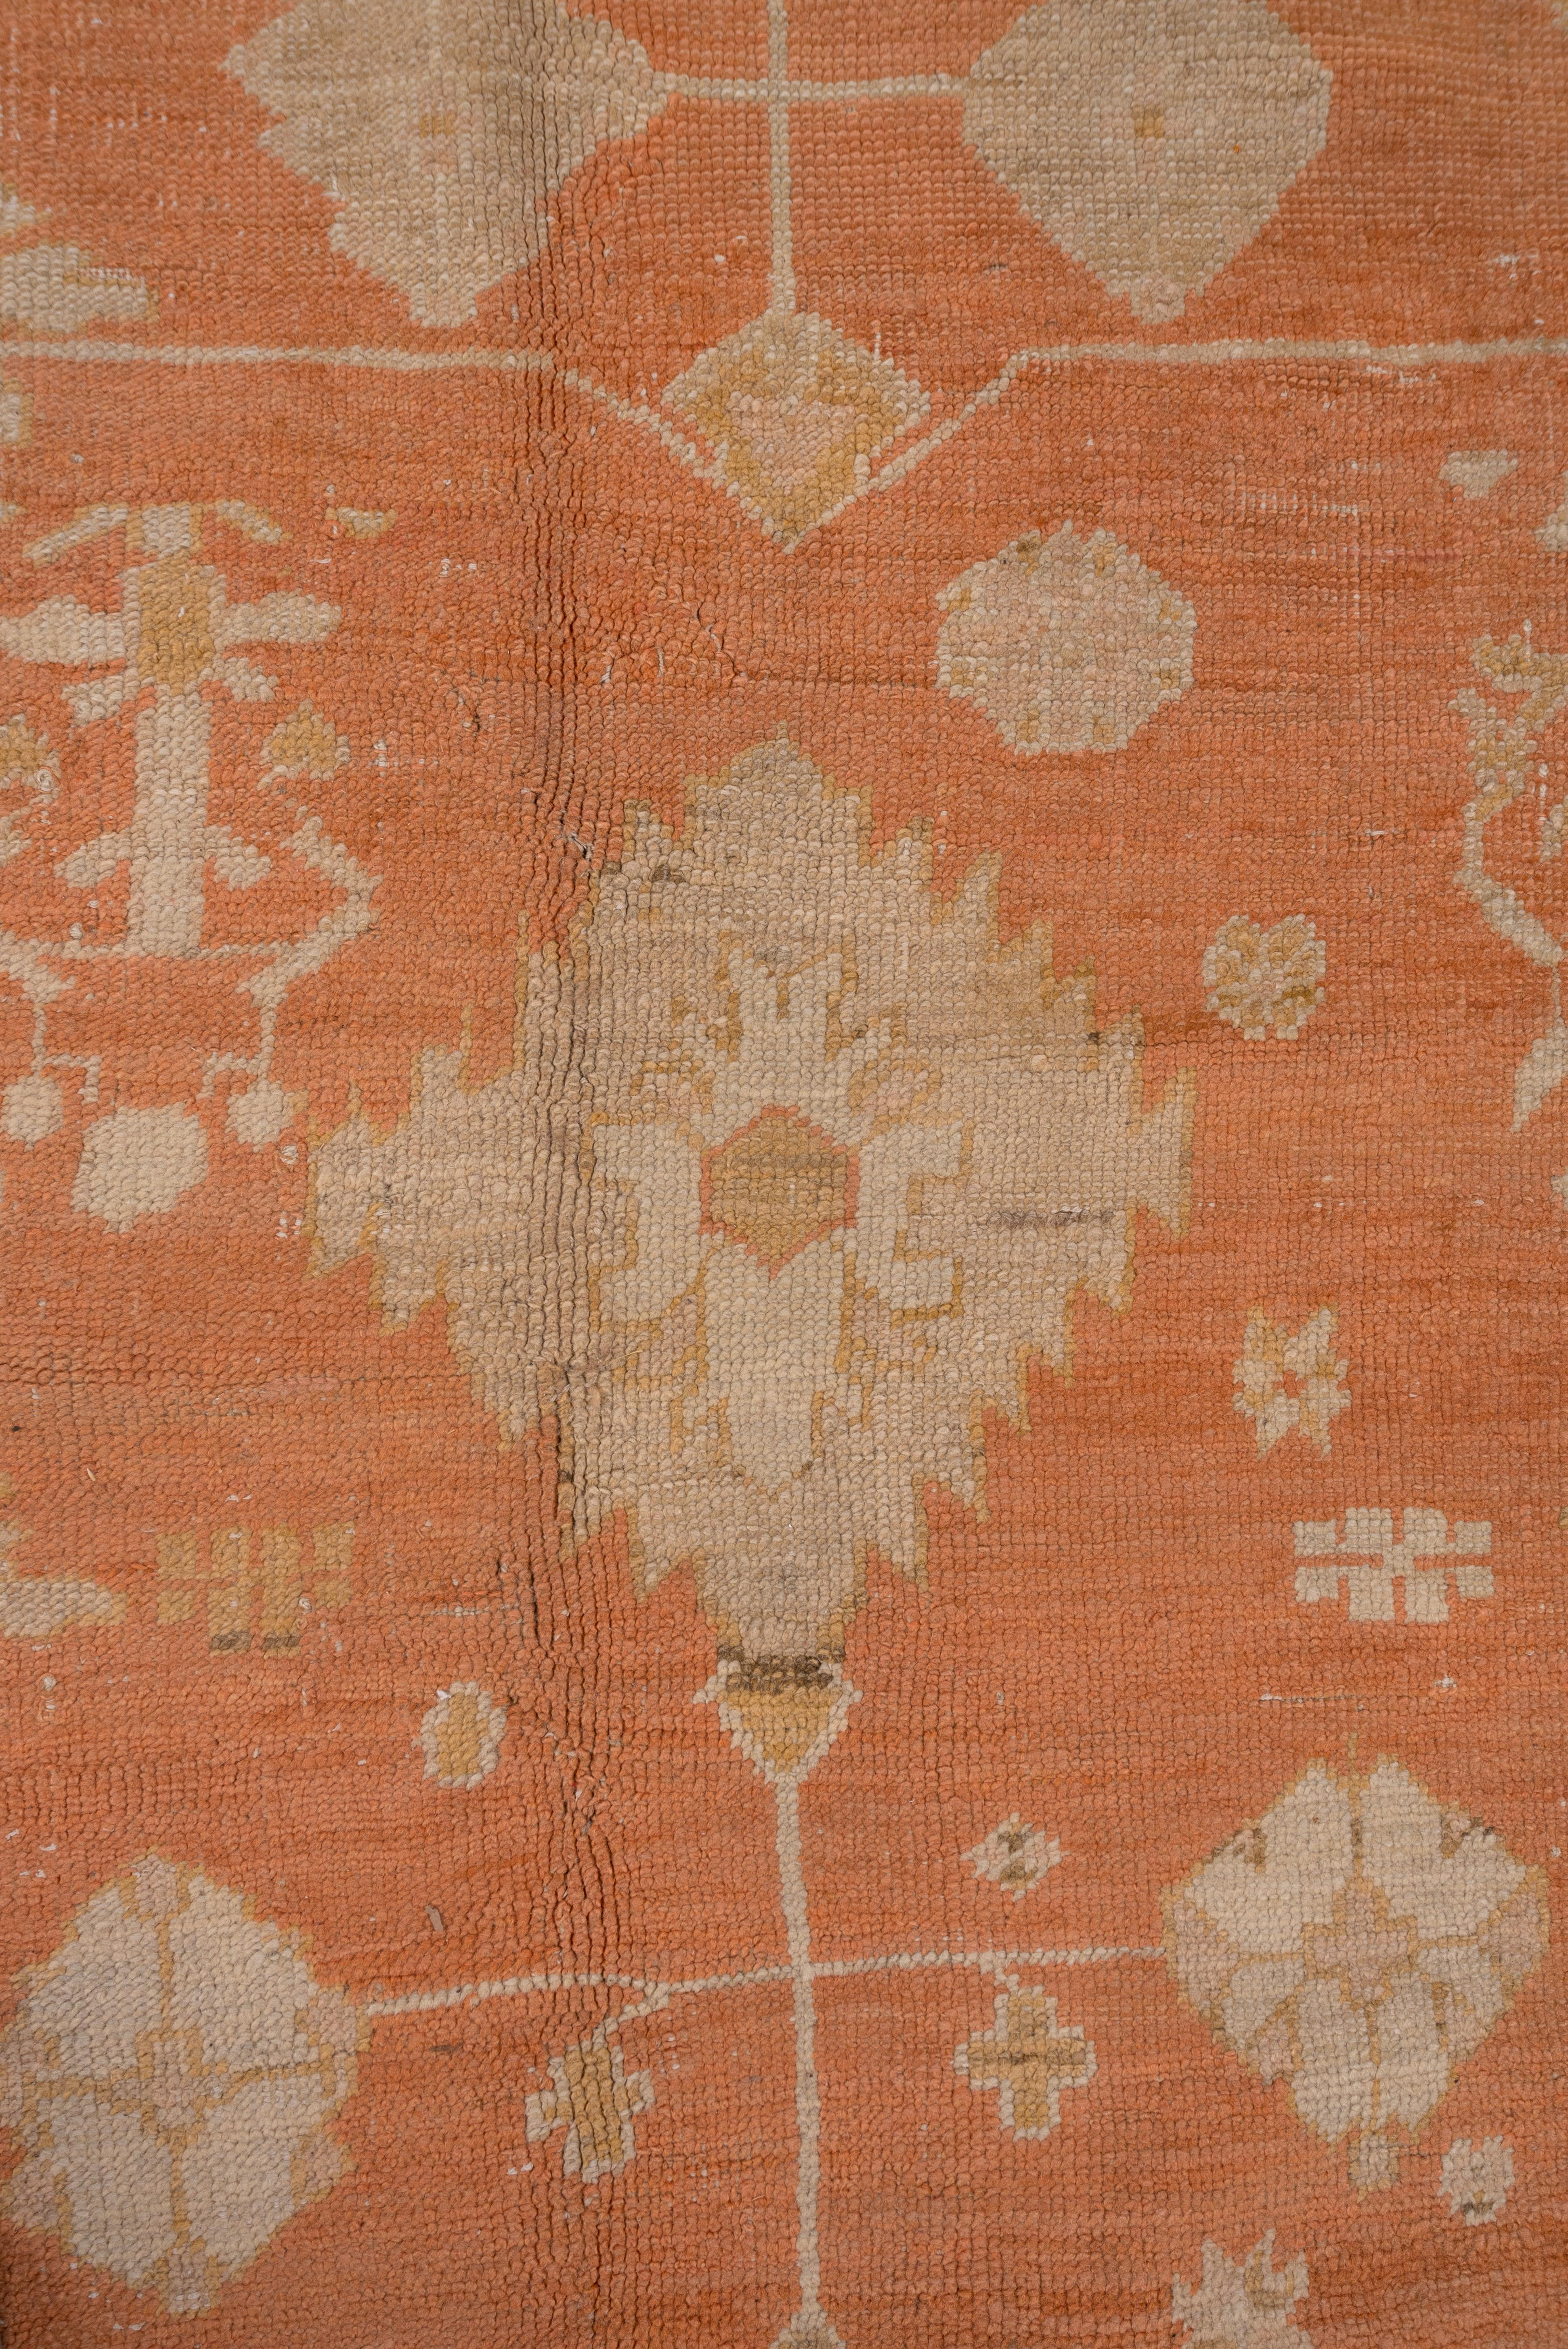 Antique Turkish Oushak Rug, Orange All-Over Field, Ivory Borders, circa 1900s In Good Condition For Sale In New York, NY